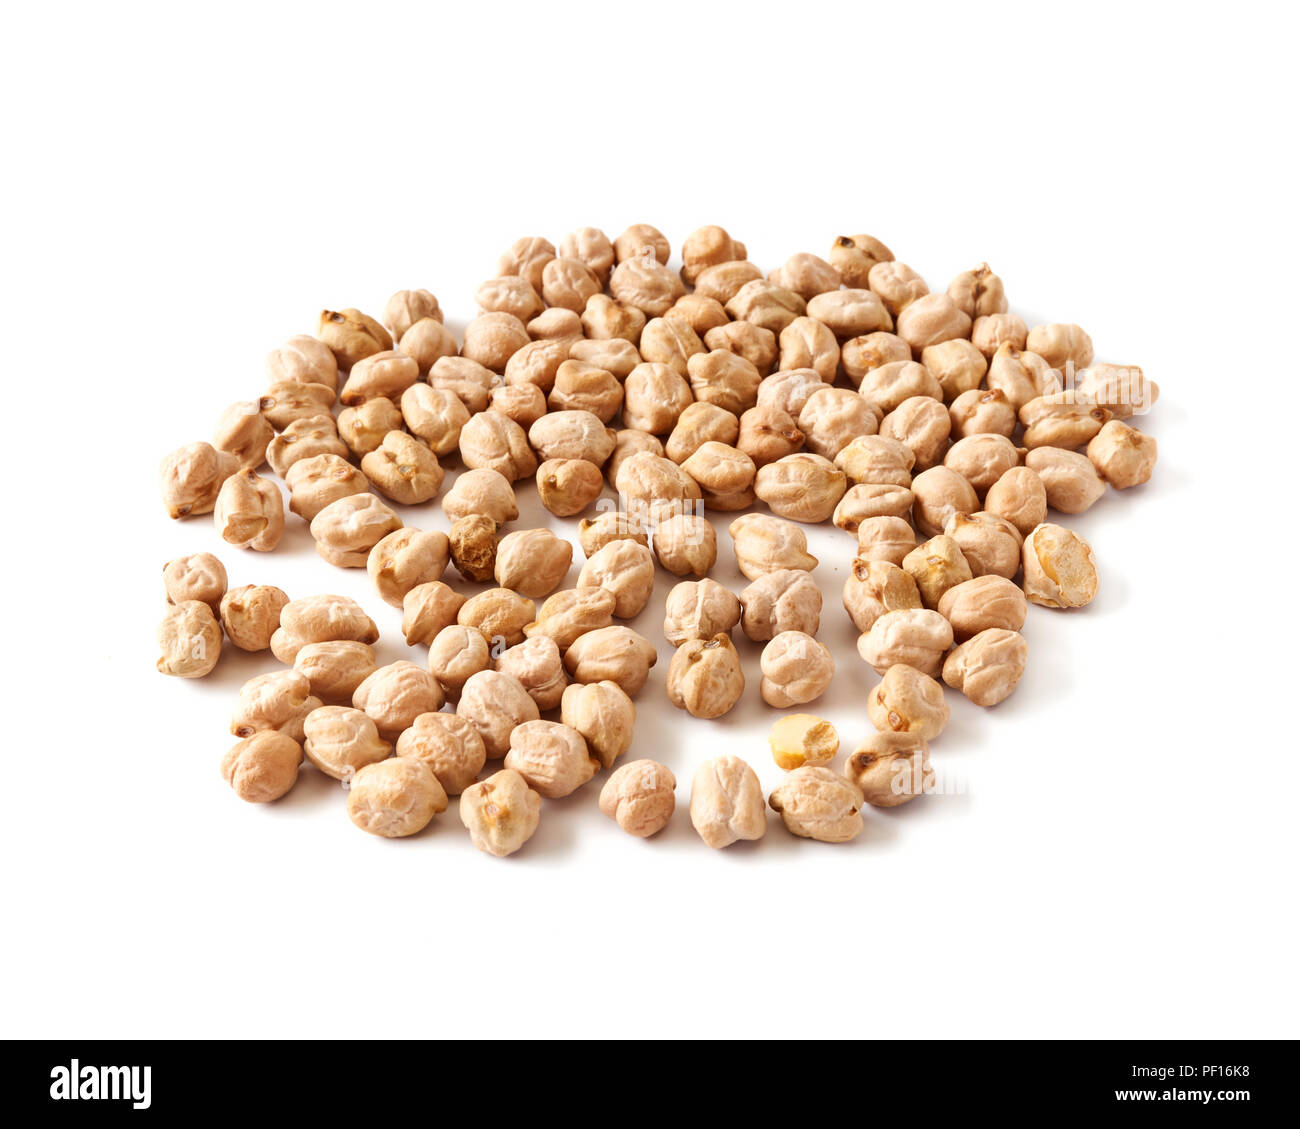 Dried chickpeas isolated on a white background. Stock Photo